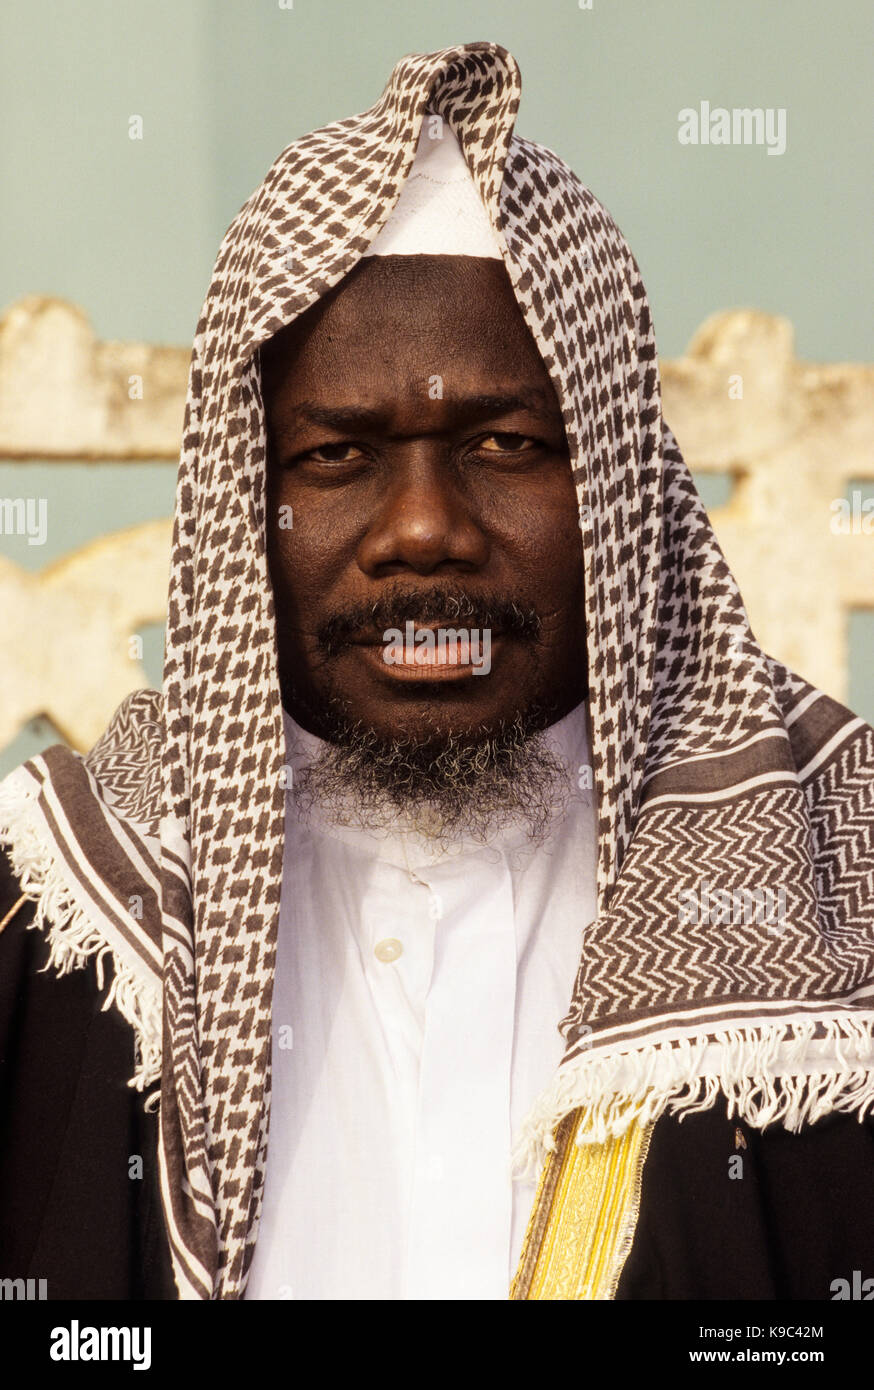 Yorobodi, Ivory Coast, Cote d'Ivoire.  Imam of the Mosque of Yorobodi.  Member of the Anyi (Agni) Ethnic Group, a sub-group of the Akan People. Stock Photo